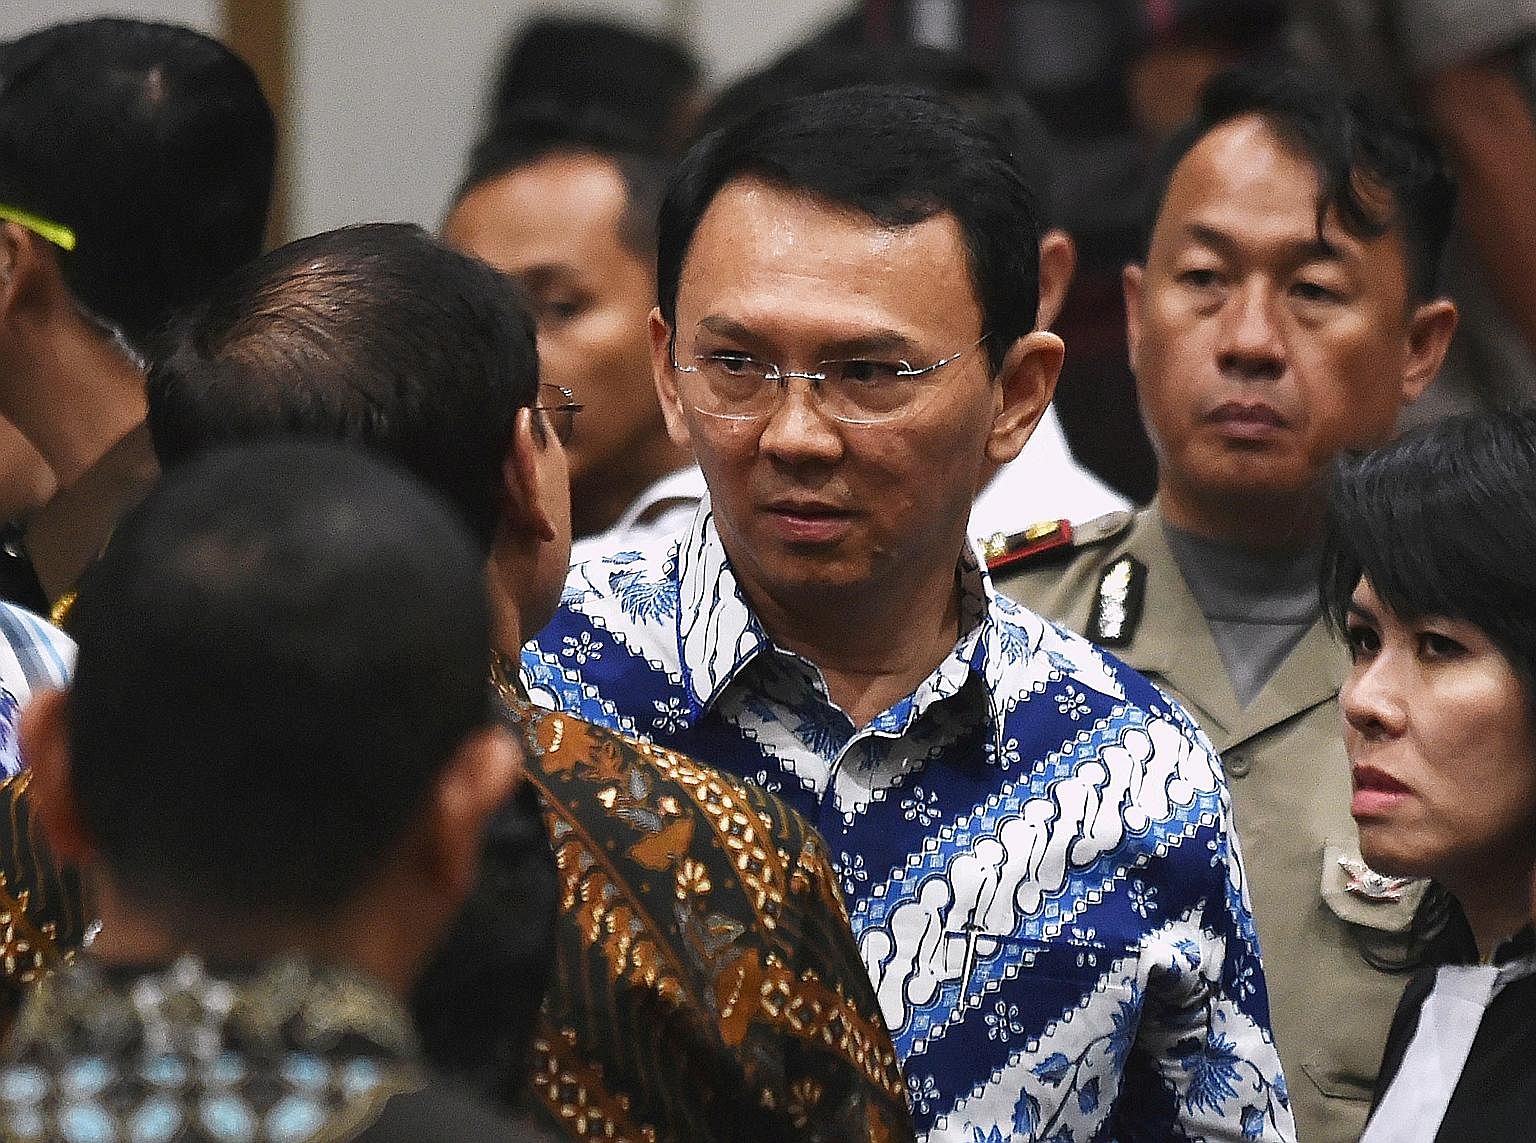 Former Jakarta governor Basuki Tjahaja Purnama, popularly known as Ahok, could benefit from a generational shift among Indonesian voters should he decide on a political comeback.